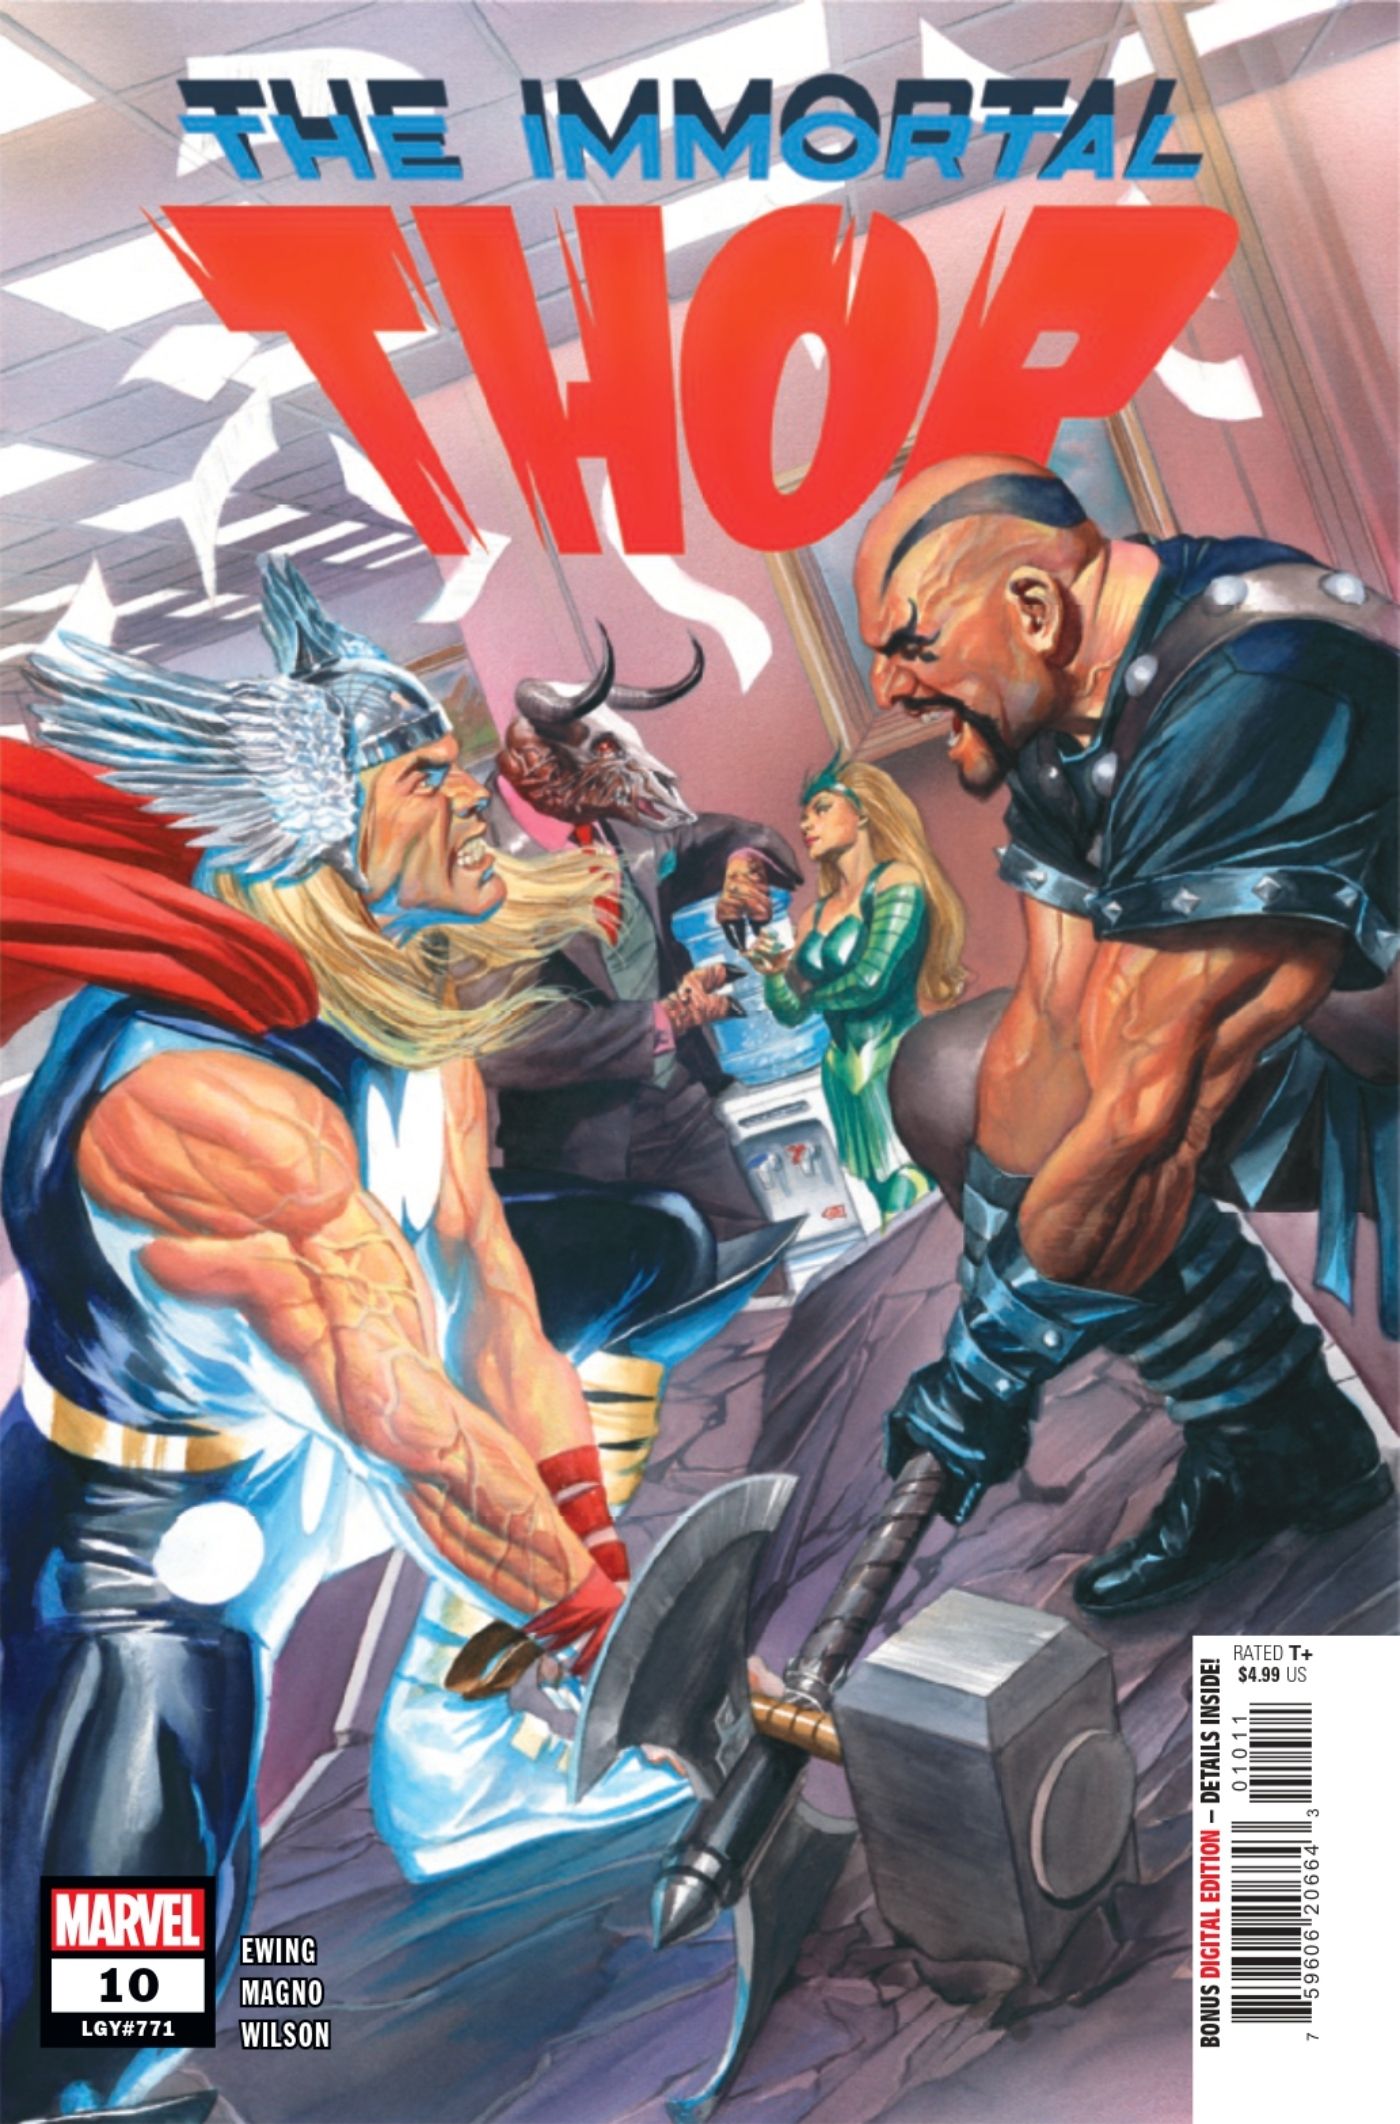 The Immortal Thor #10 cover featuring Thor fighting the Executioner.